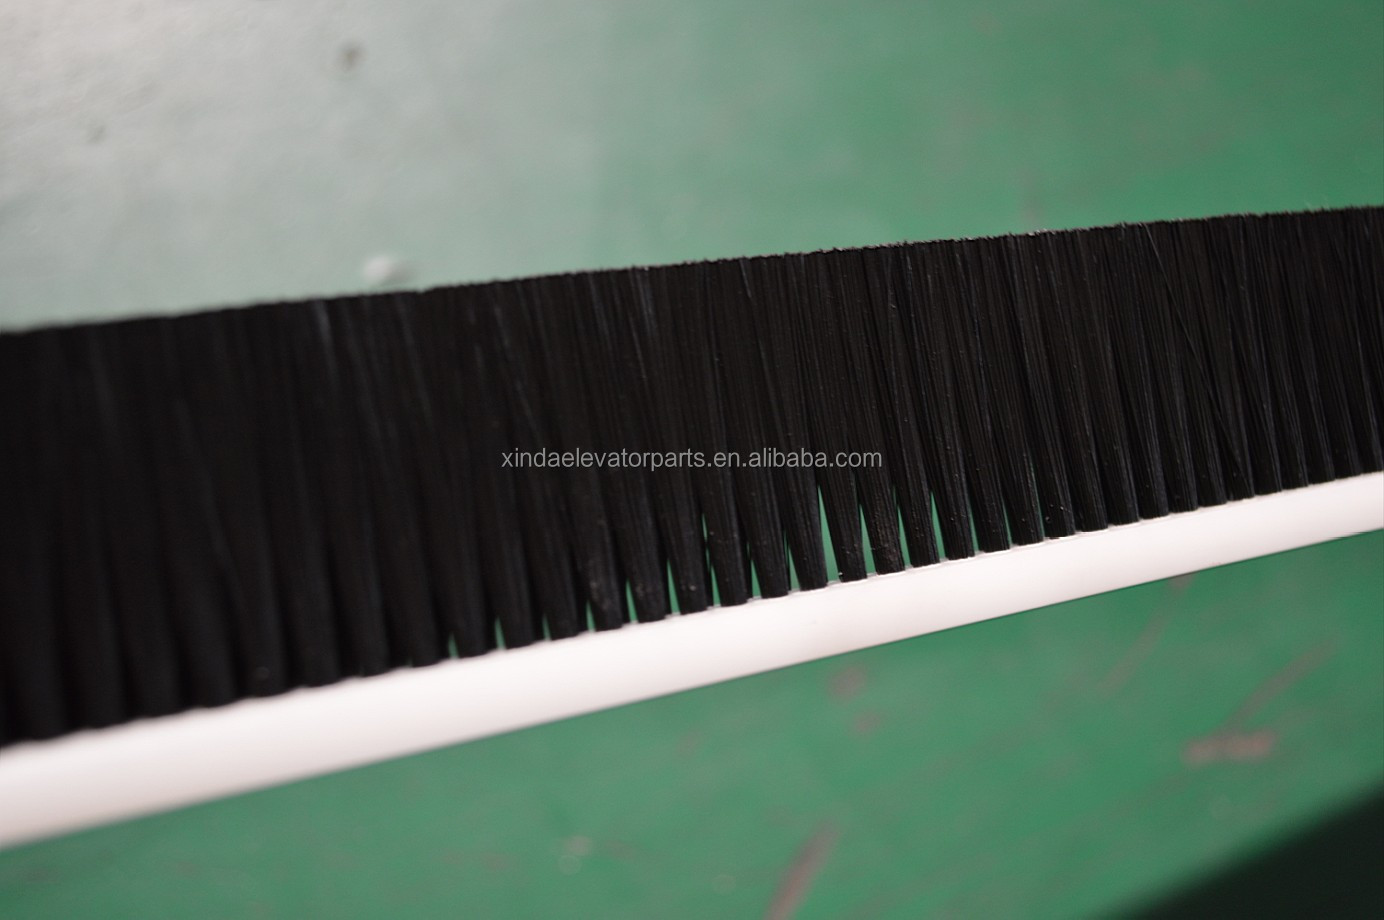 BS-3 double row Skirt Brush with aluminum pedestal for escalator and moving walk escalator spare part